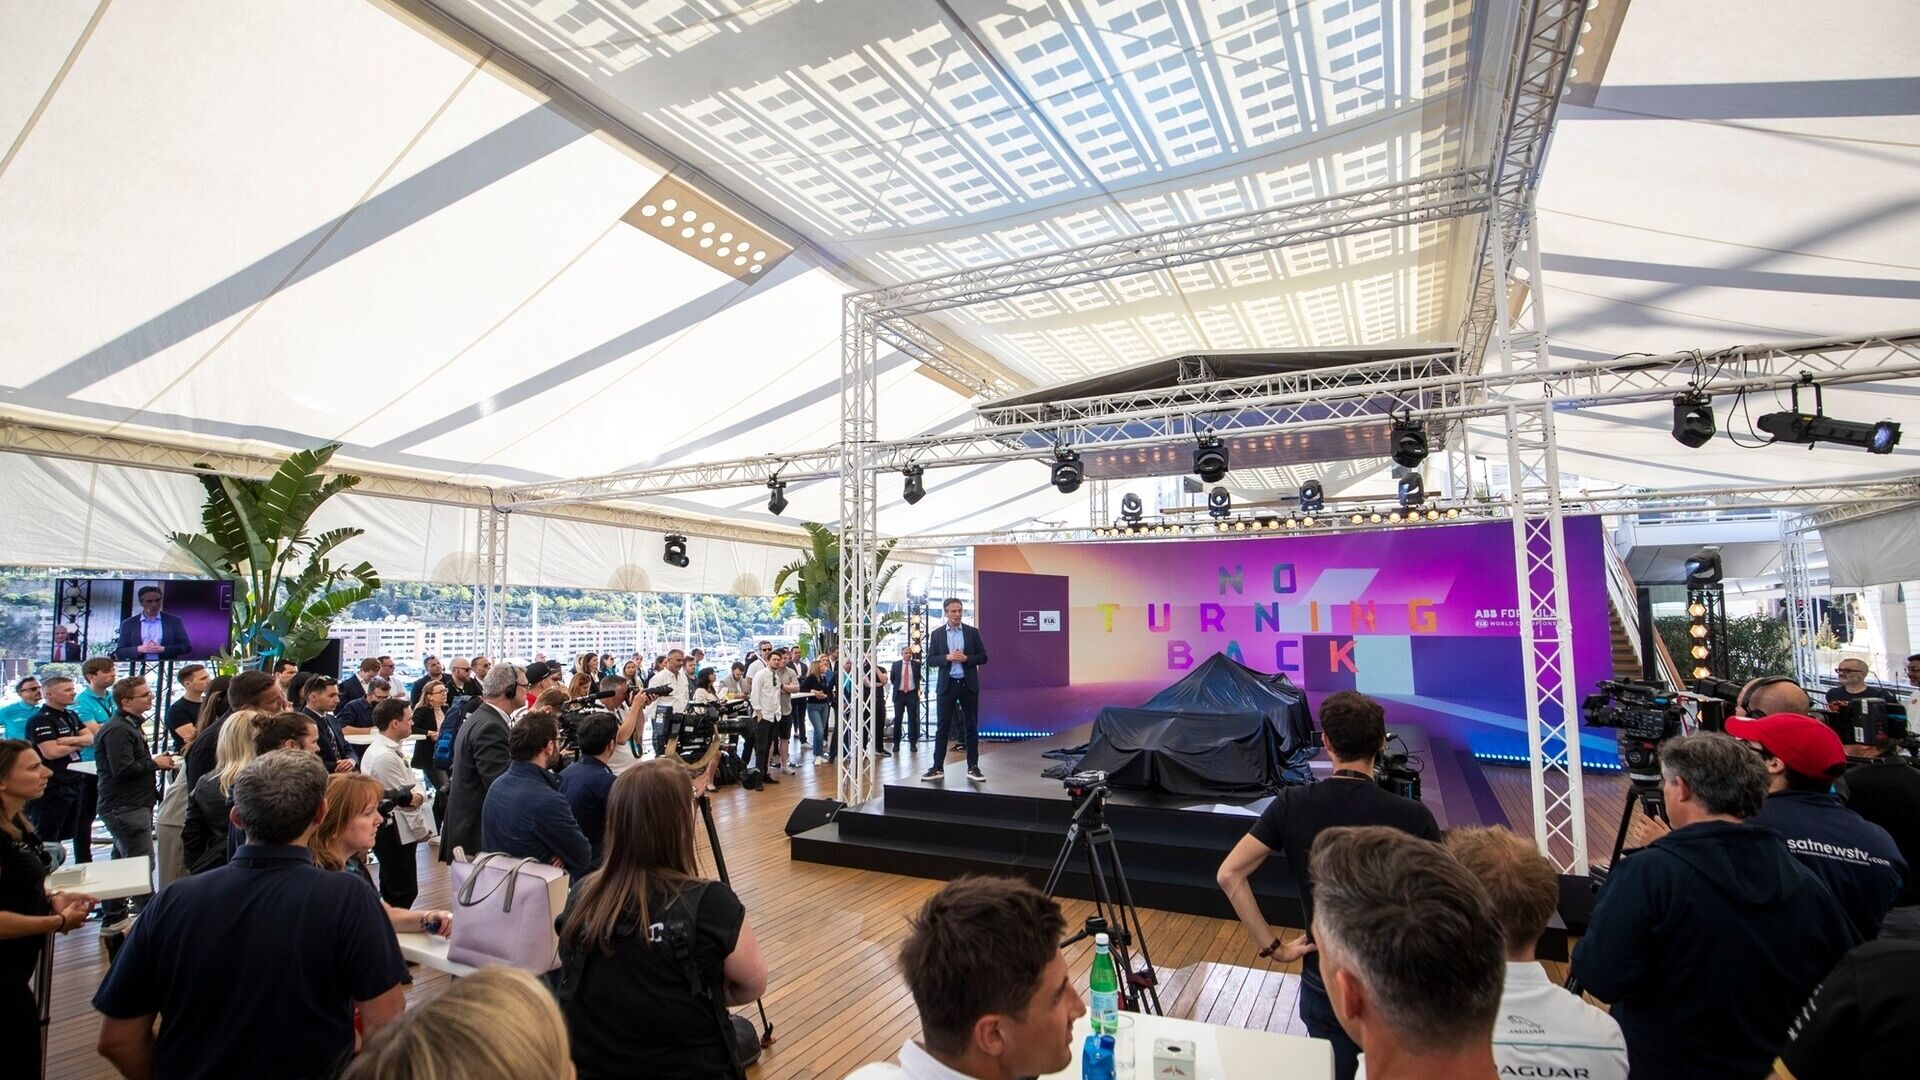 Gen3: the presentation of the Gen3 single-seater took place at the Yacht Club de Monaco in the presence of Mohammed Bin Sulayem, President of the FIA, and Jamie Reigle, CEO of Formula E